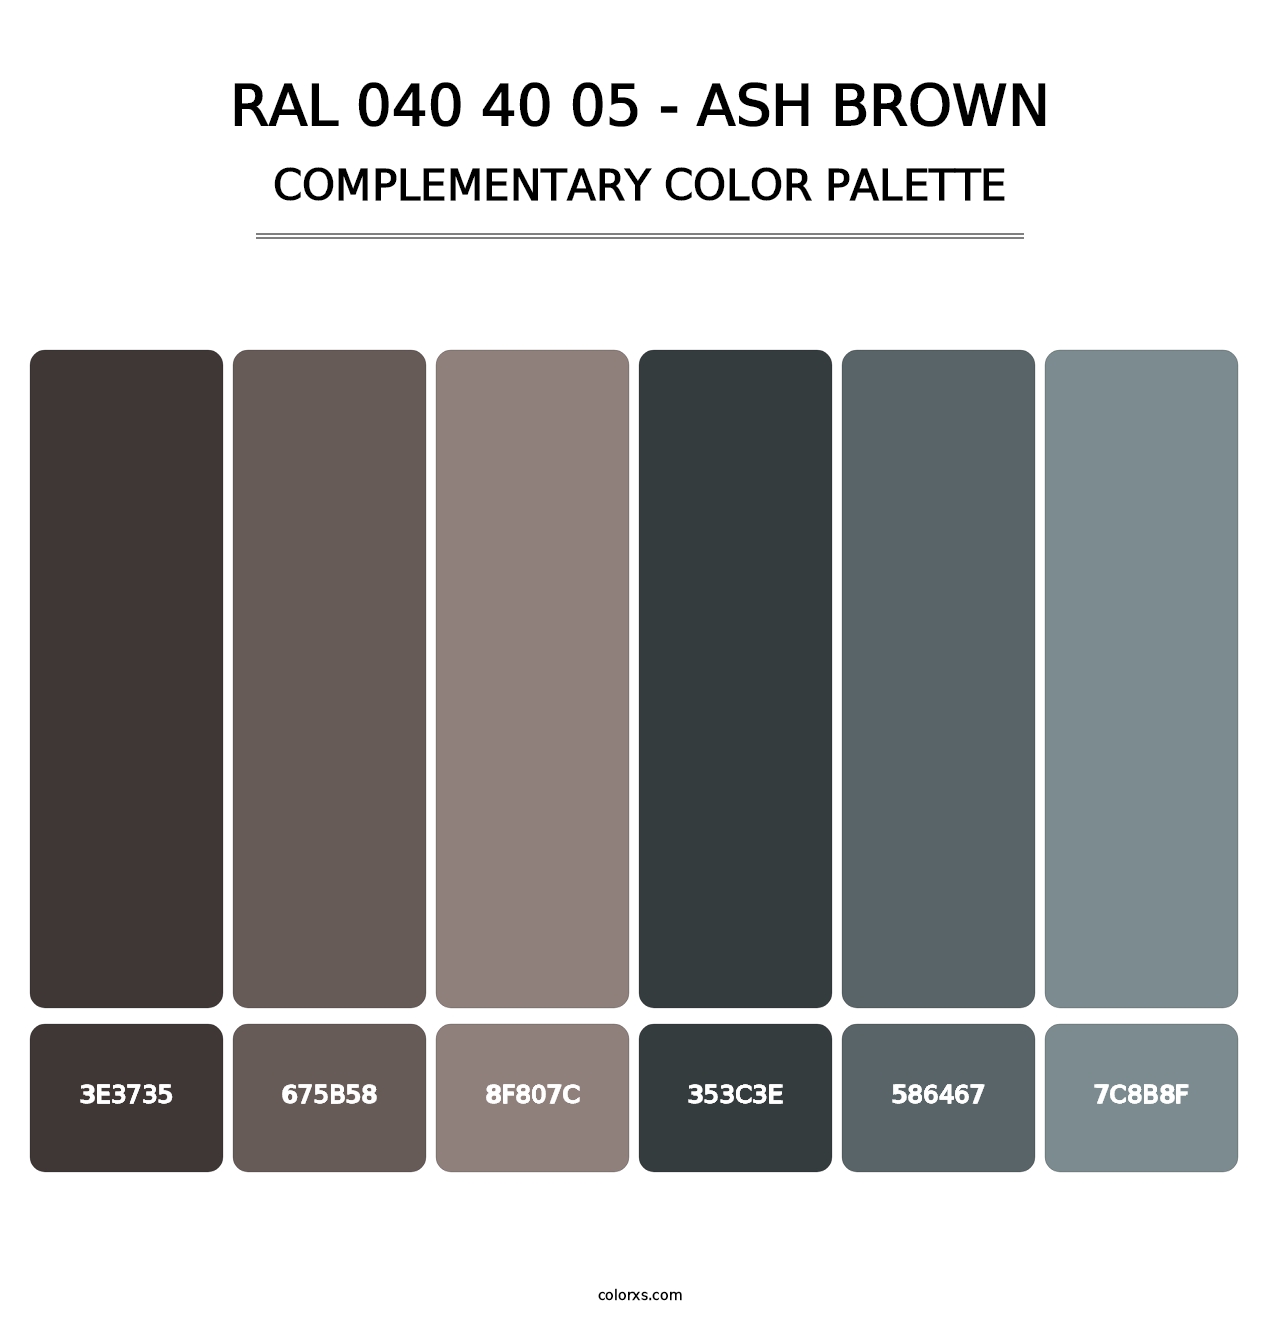 RAL 040 40 05 - Ash Brown - Complementary Color Palette